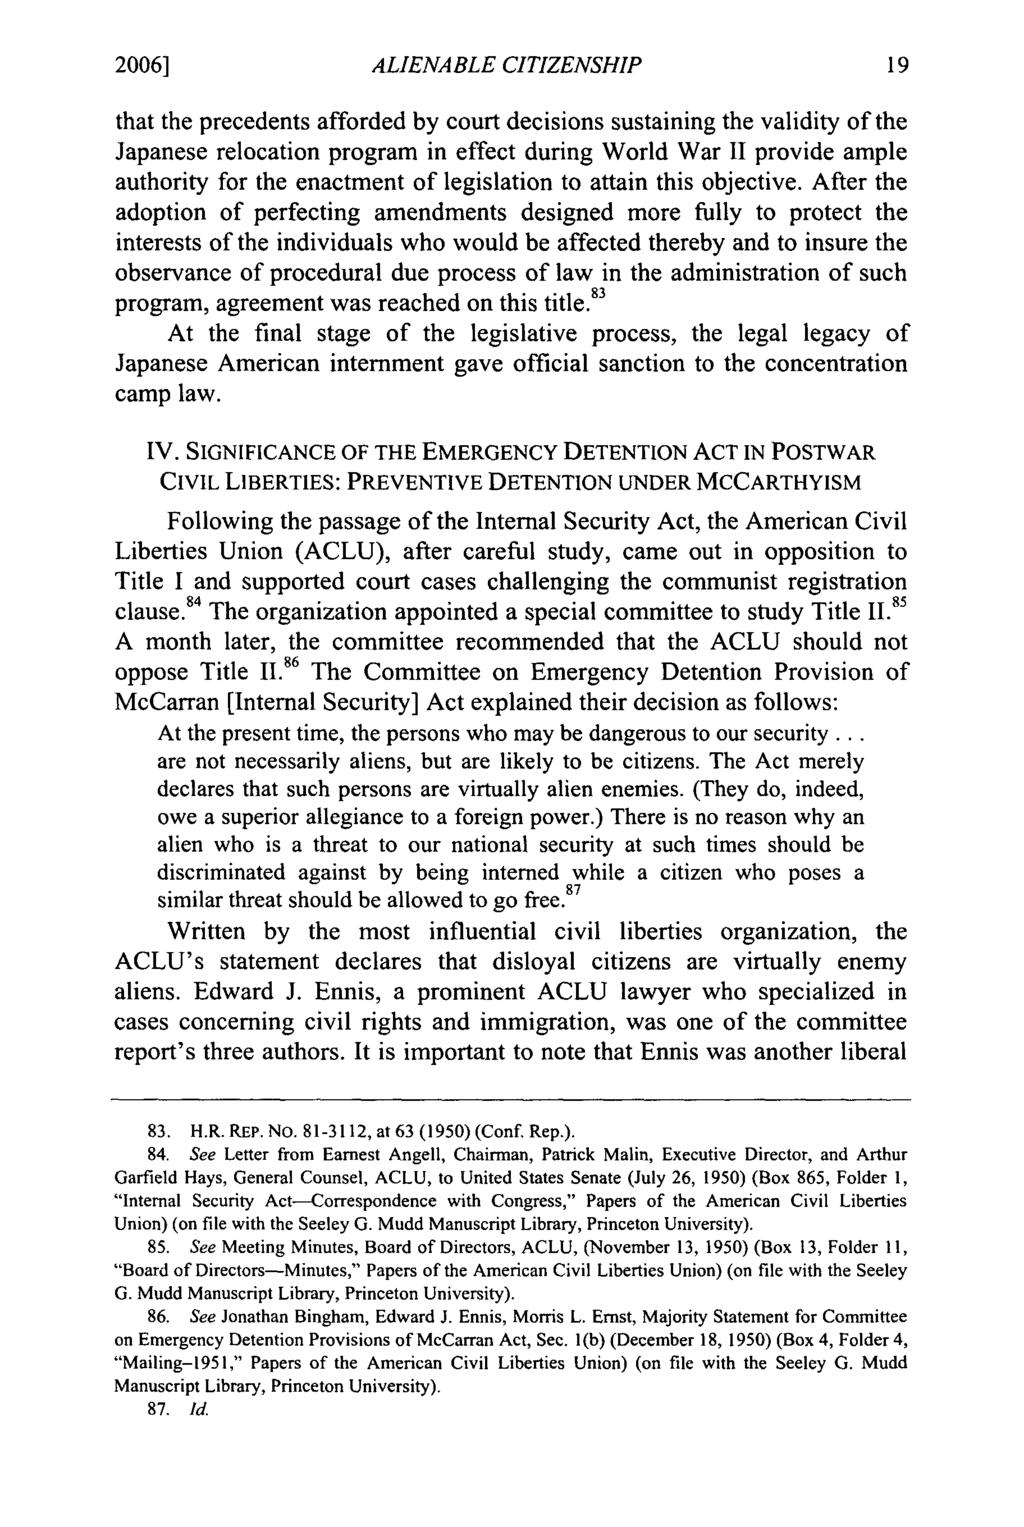 2006] ALIENABLE CITIZENSHIP that the precedents afforded by court decisions sustaining the validity of the Japanese relocation program in effect during World War II provide ample authority for the